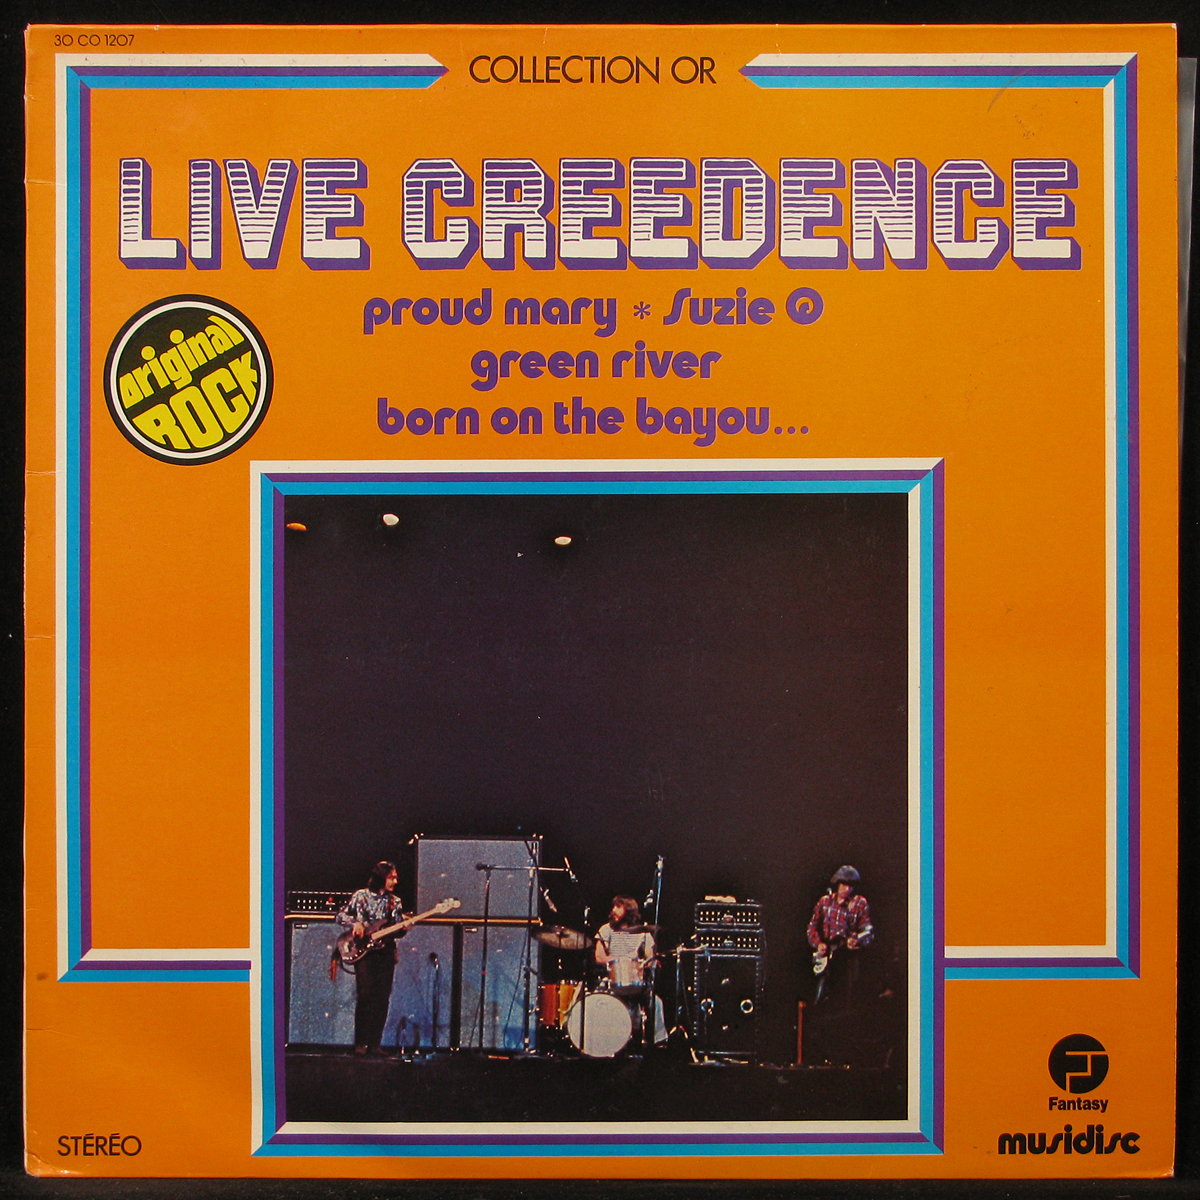 LP Creedence Clearwater Revival — Live Creedence фото